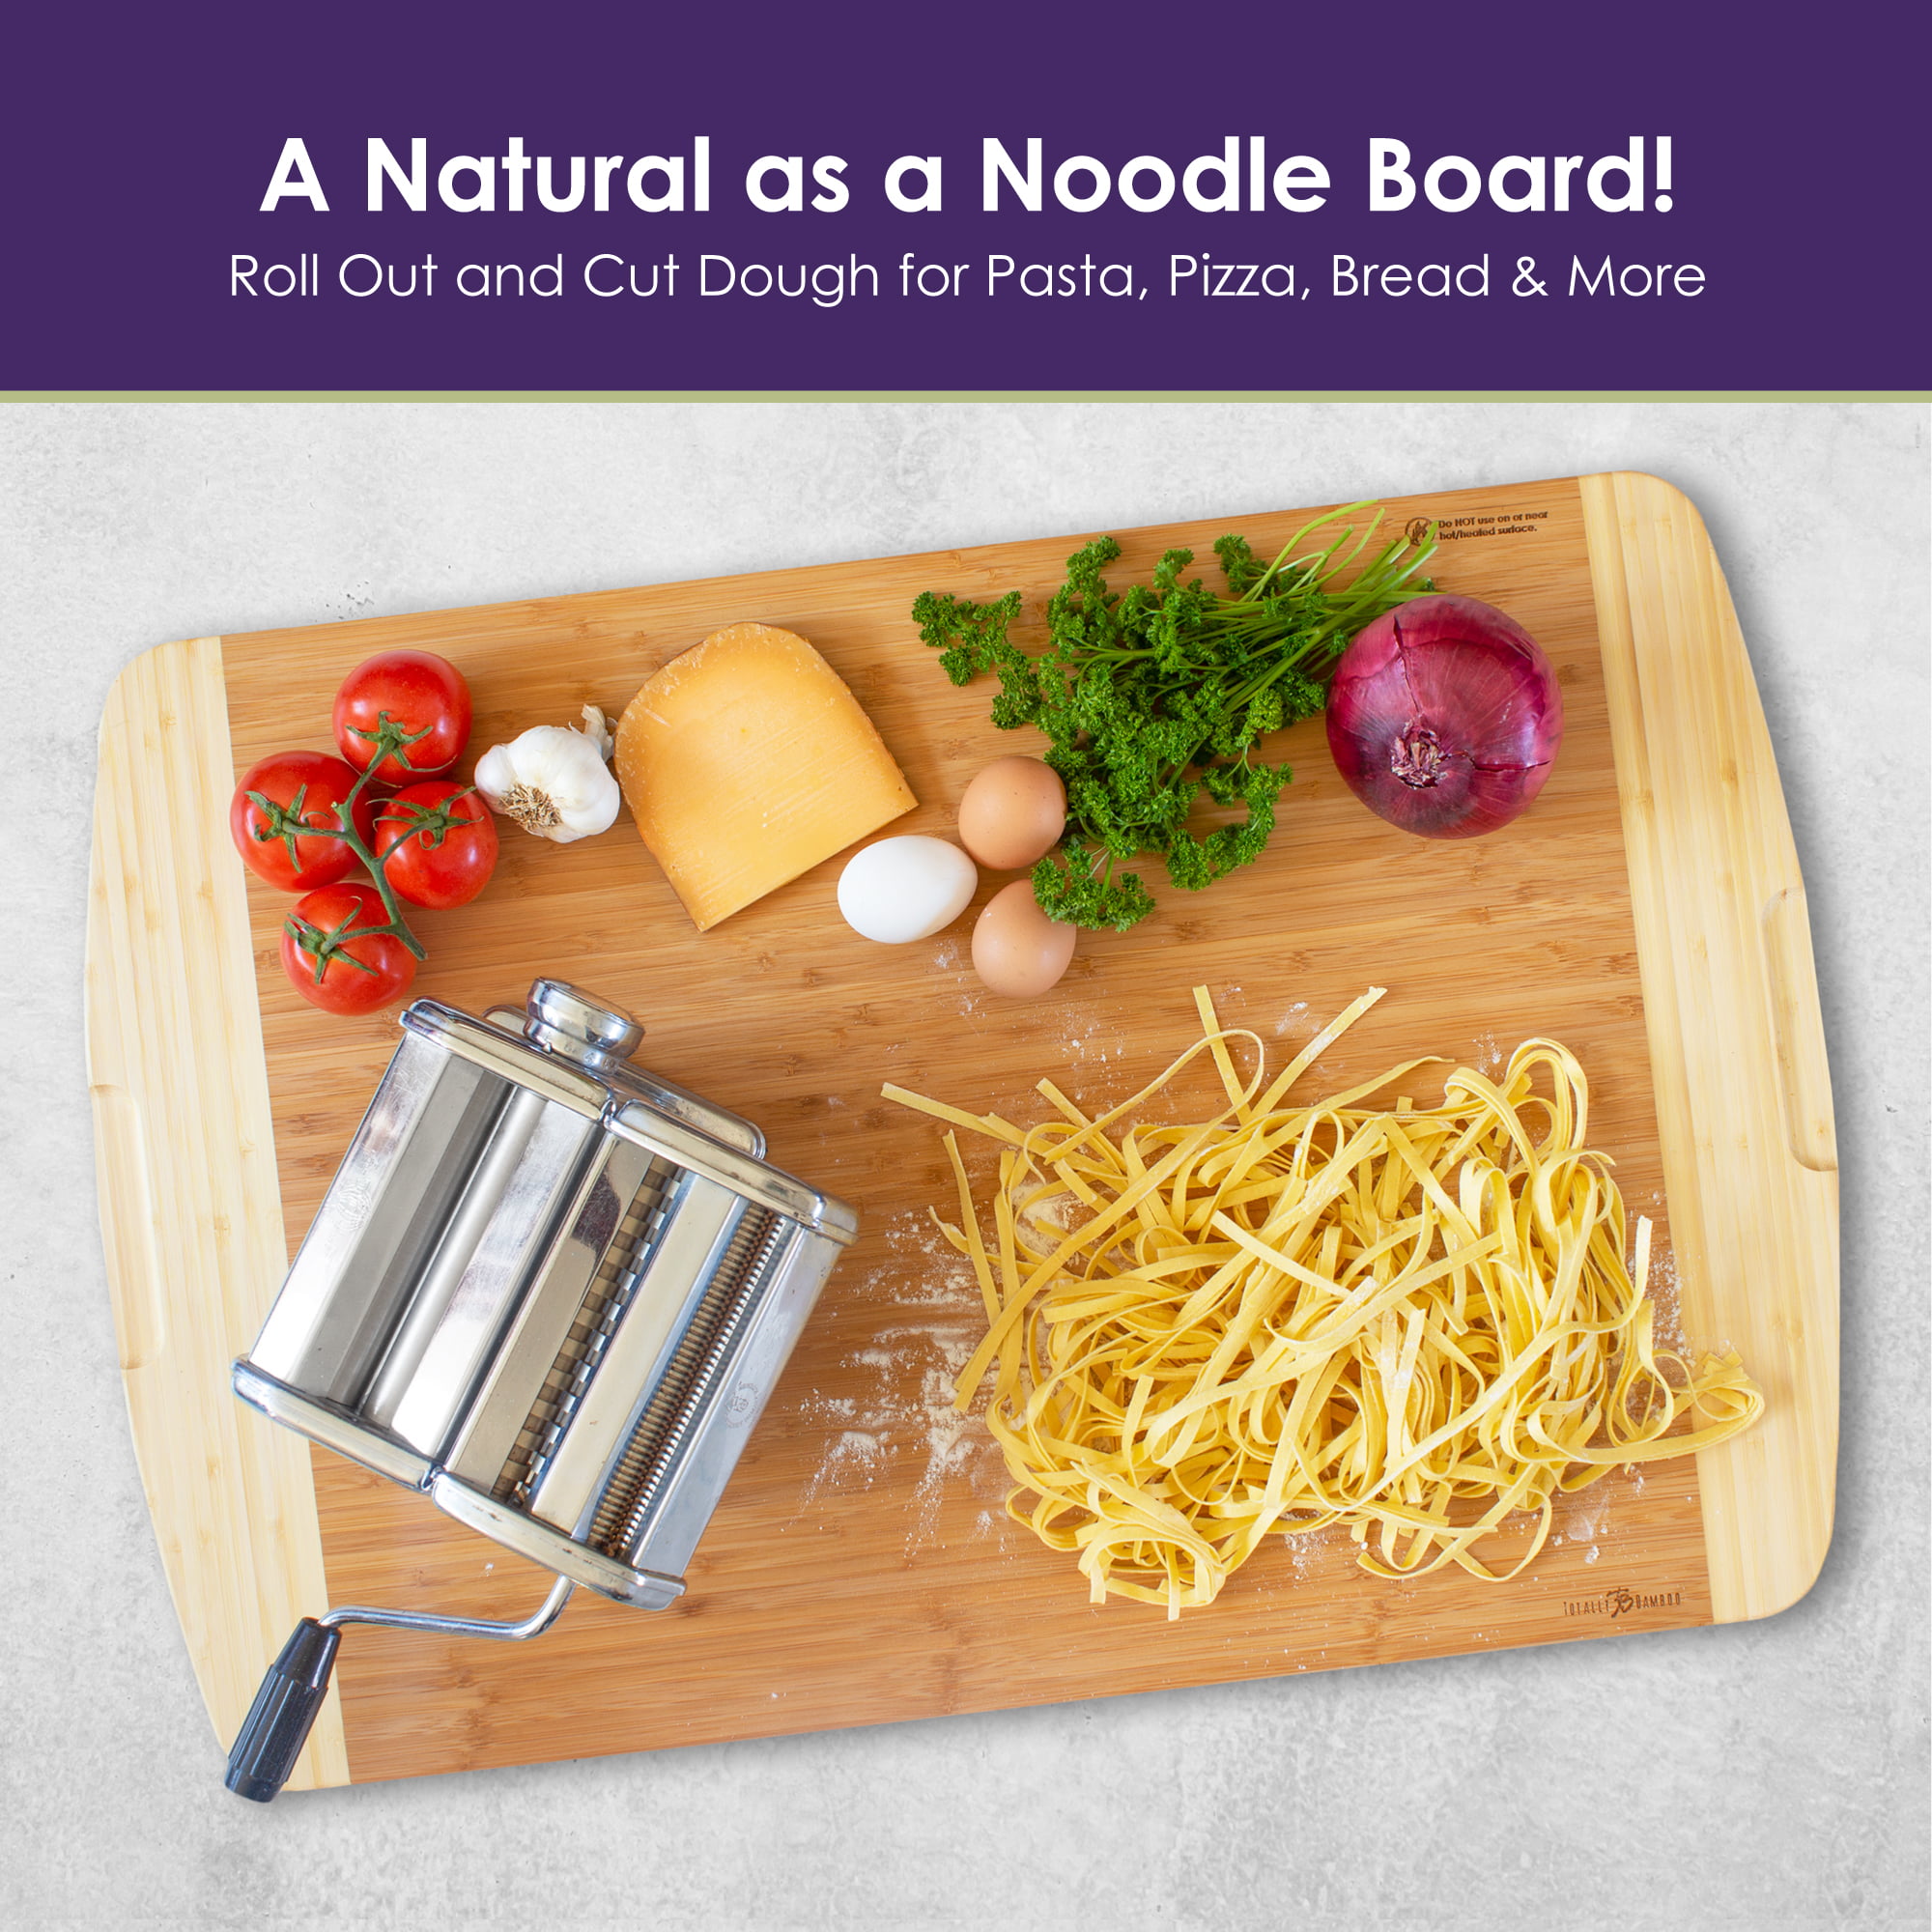 Extra Large Bamboo Cutting Board for Kitchen, Heavy Duty Wood Cutting –  bamboo and wood products Manufacturers